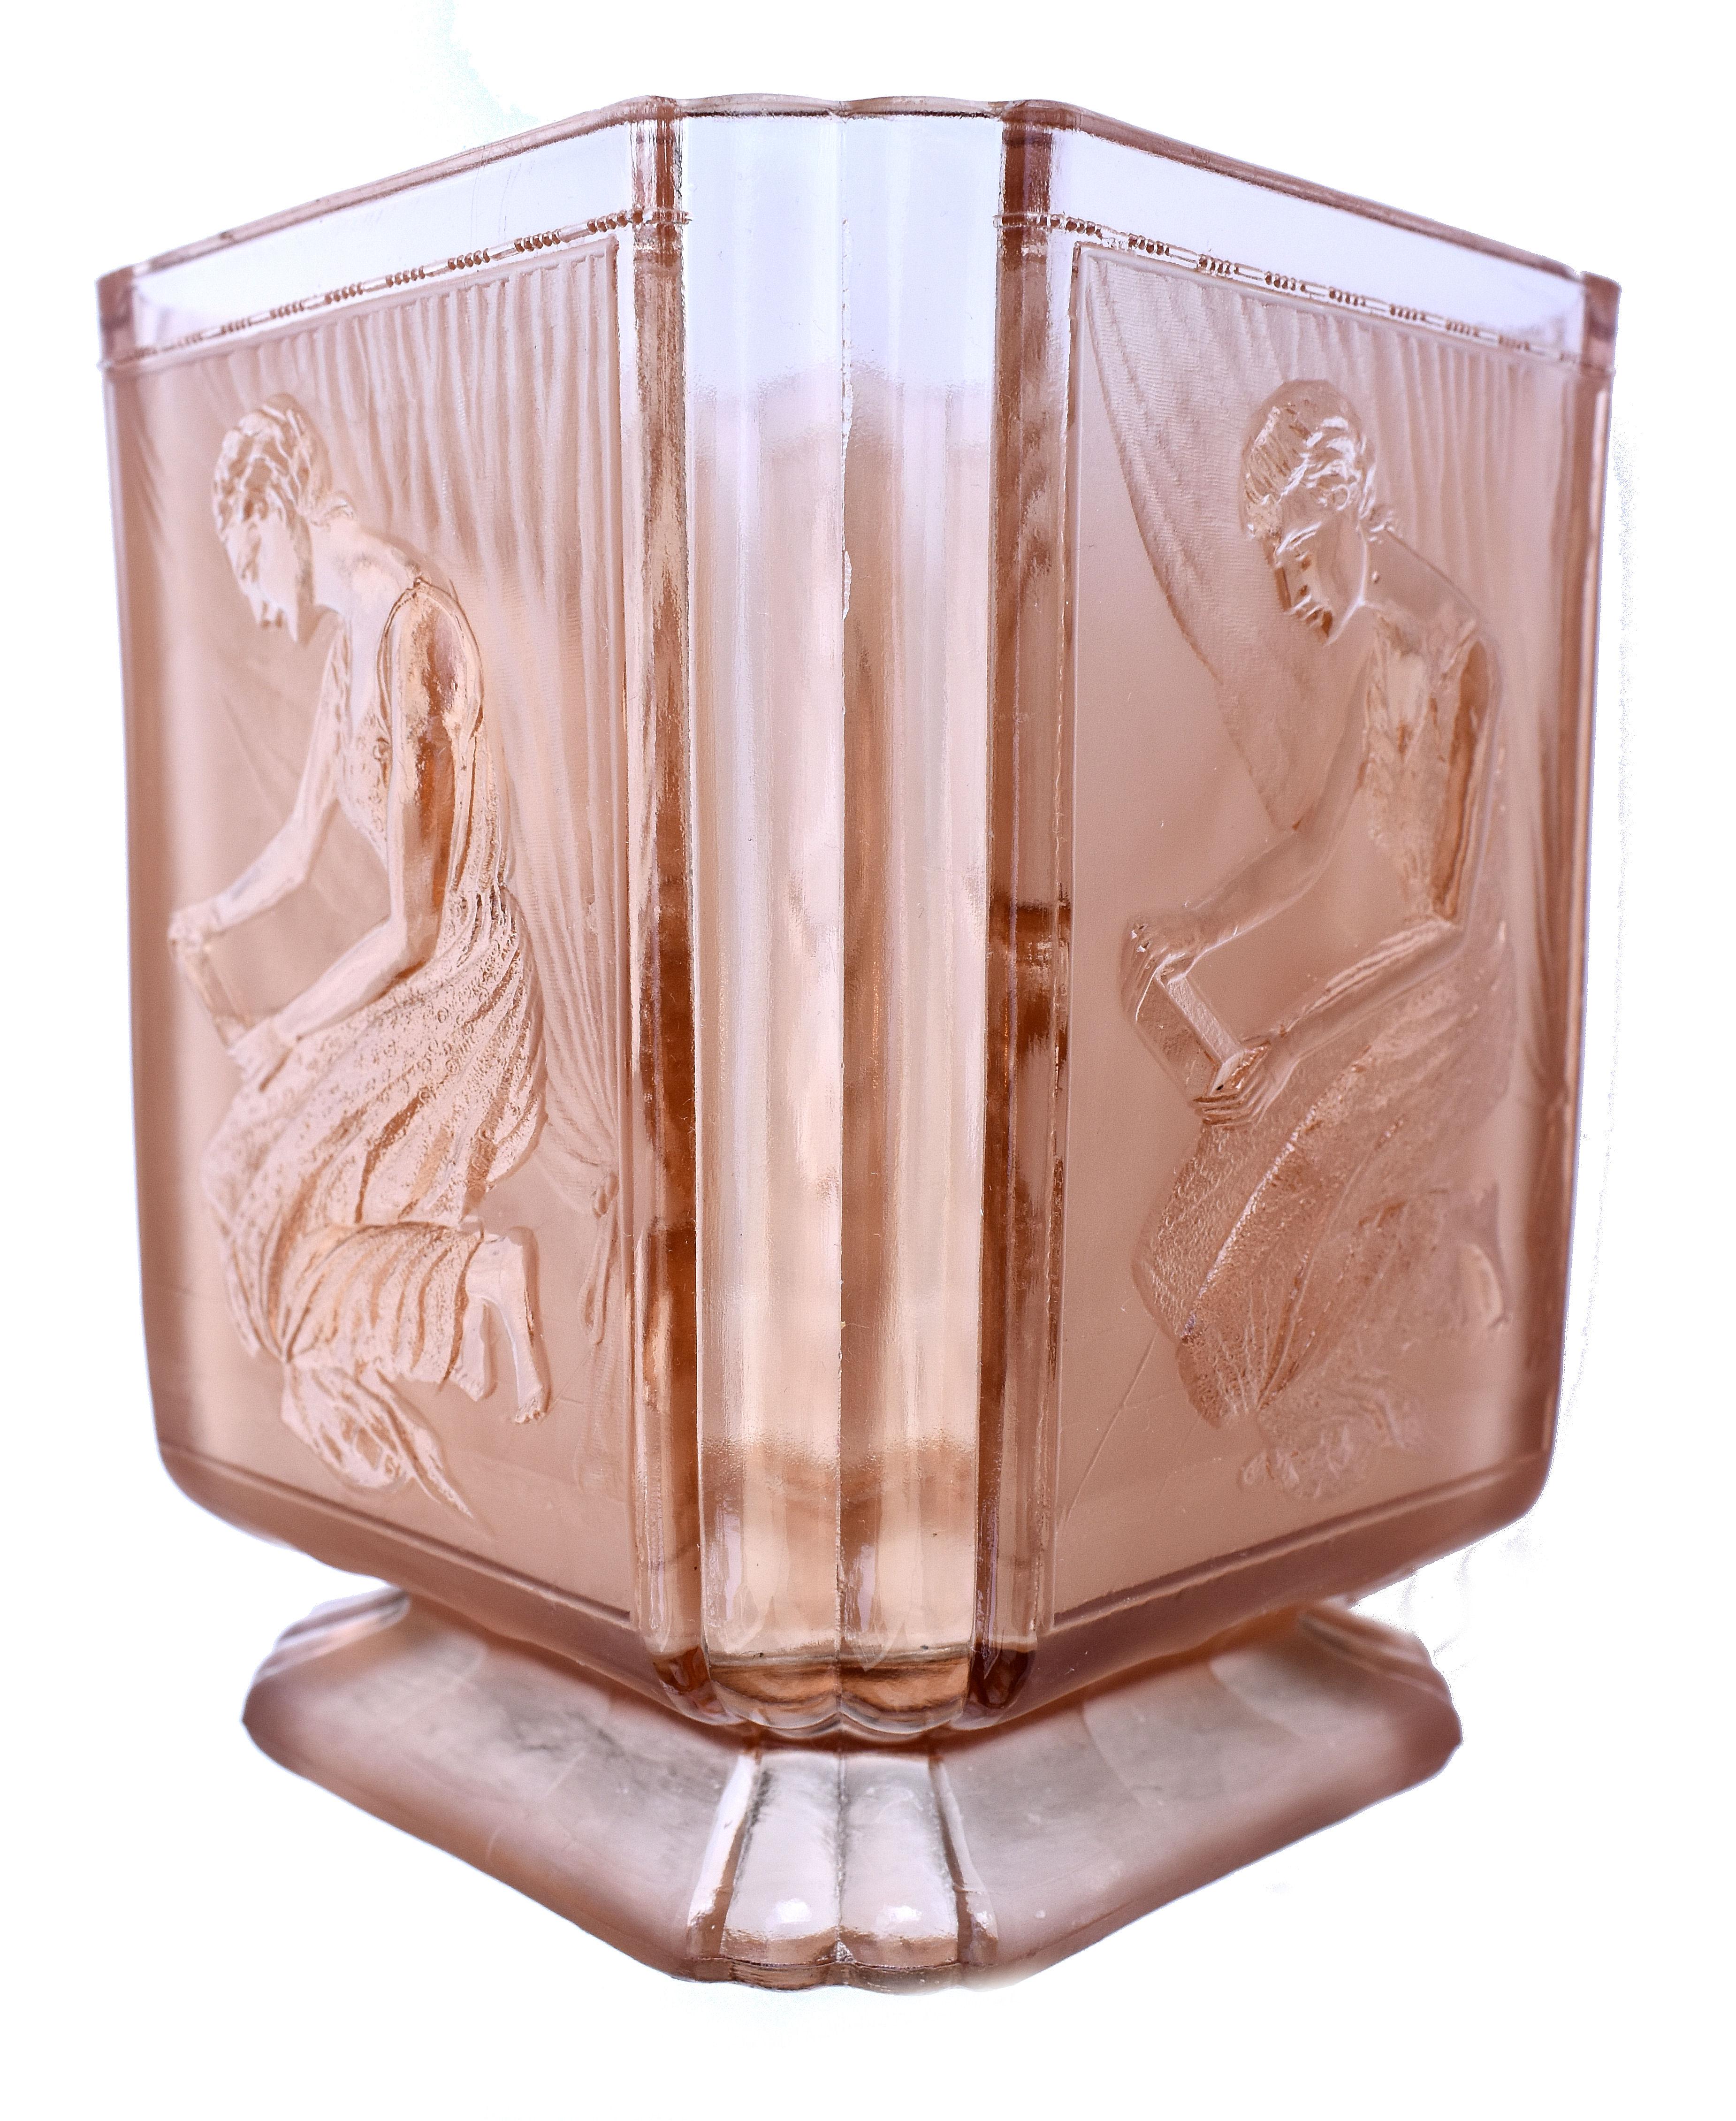 English Art Deco 'Pandora's Box'  Glass Biscuit Barrel by Sowerby, England, C1930s